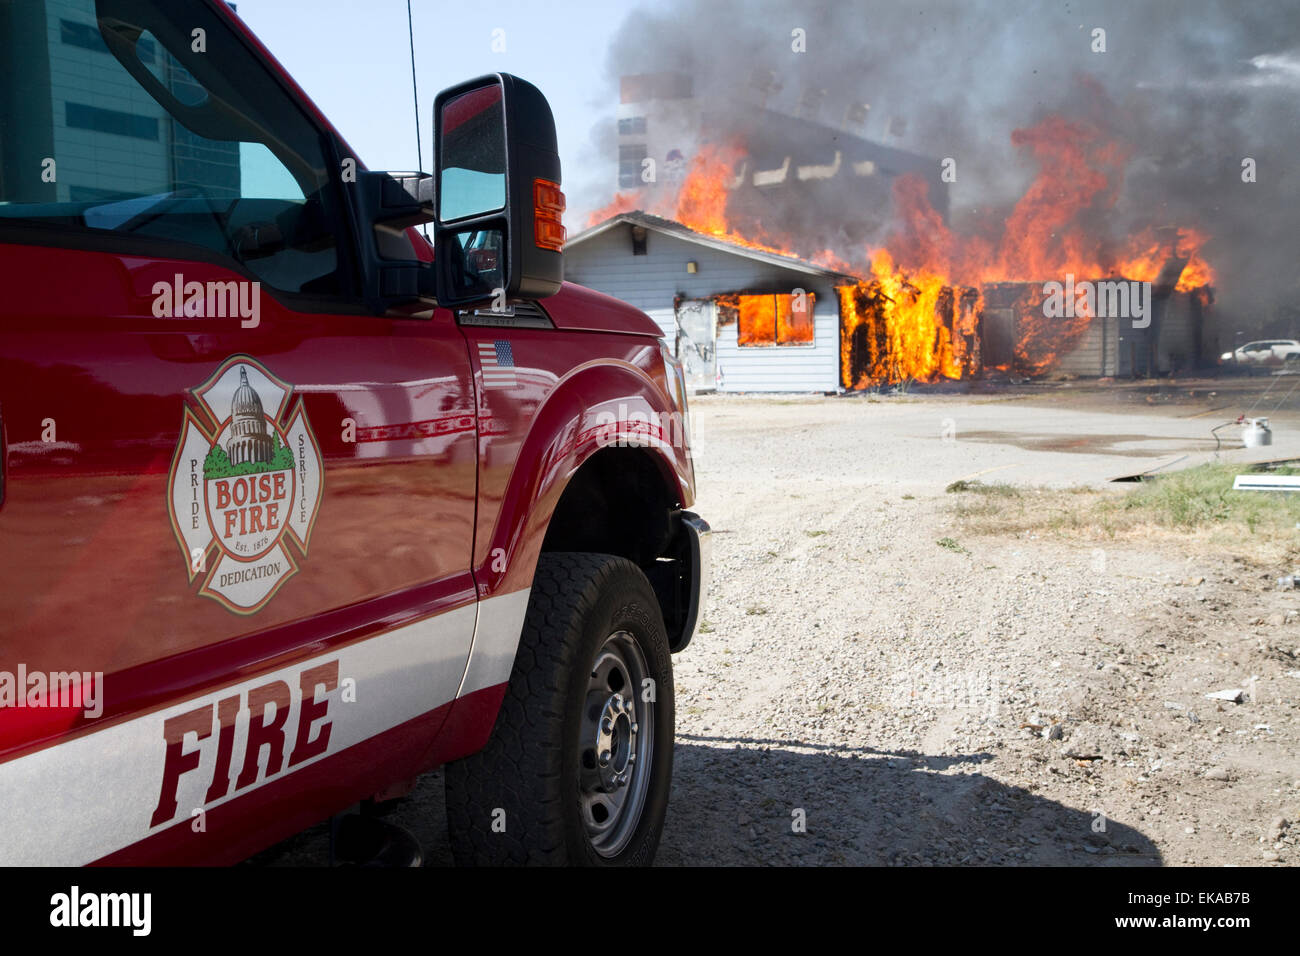 Fire command vehicle on the scene of a building fire in Boise, Idaho, USA. Stock Photo